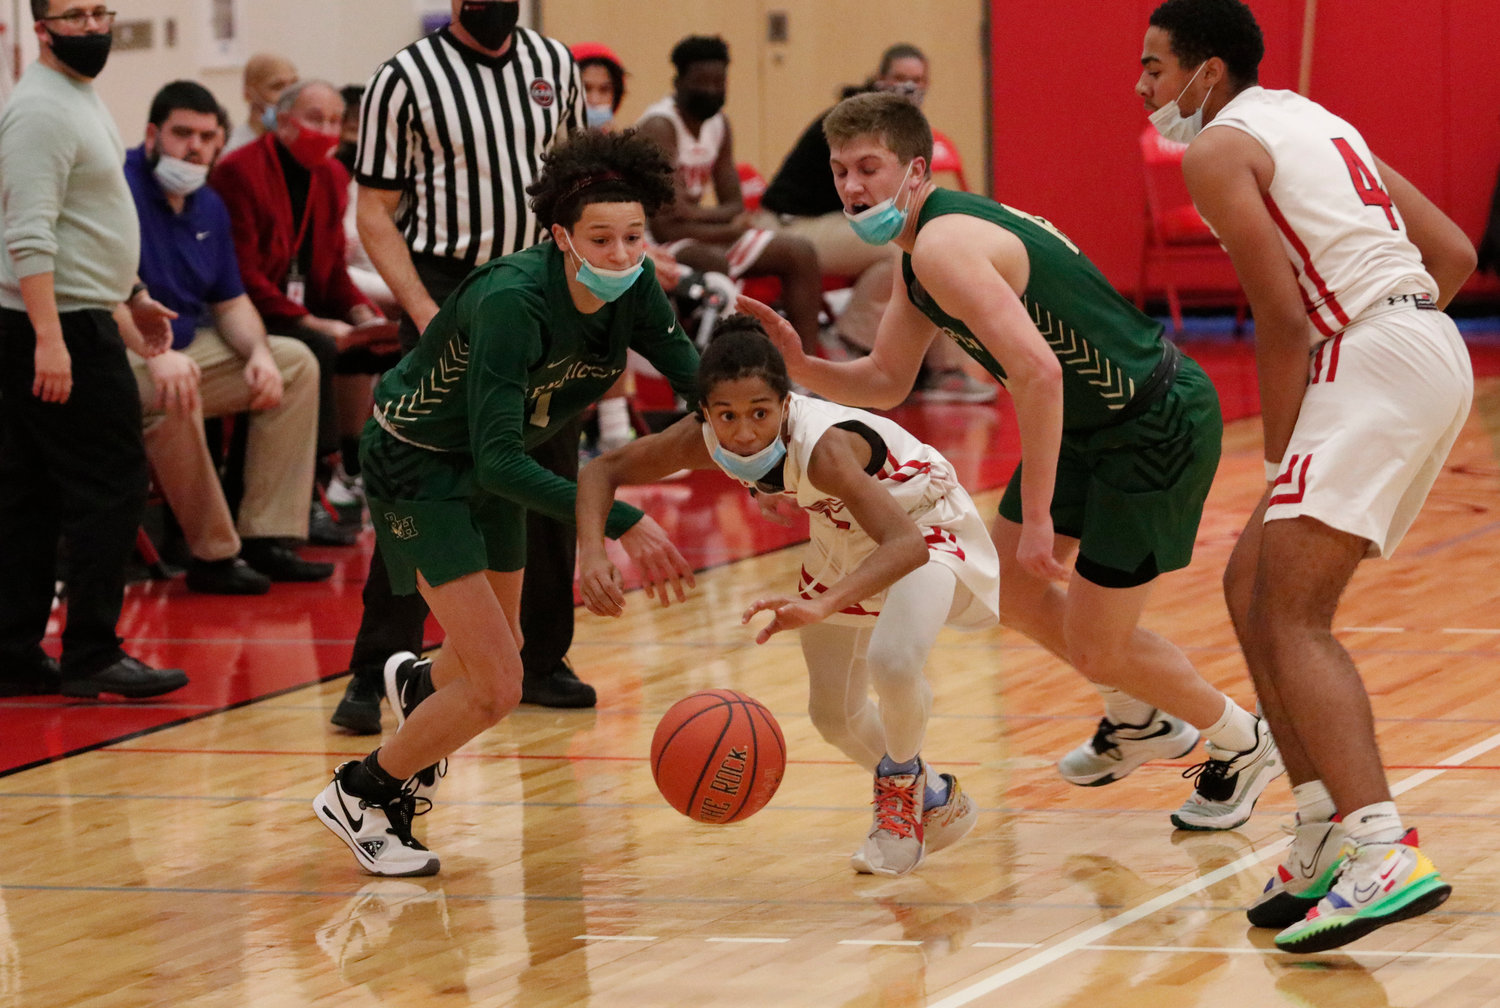 Max Collins dribbles out of trouble with Will Winfield (right).